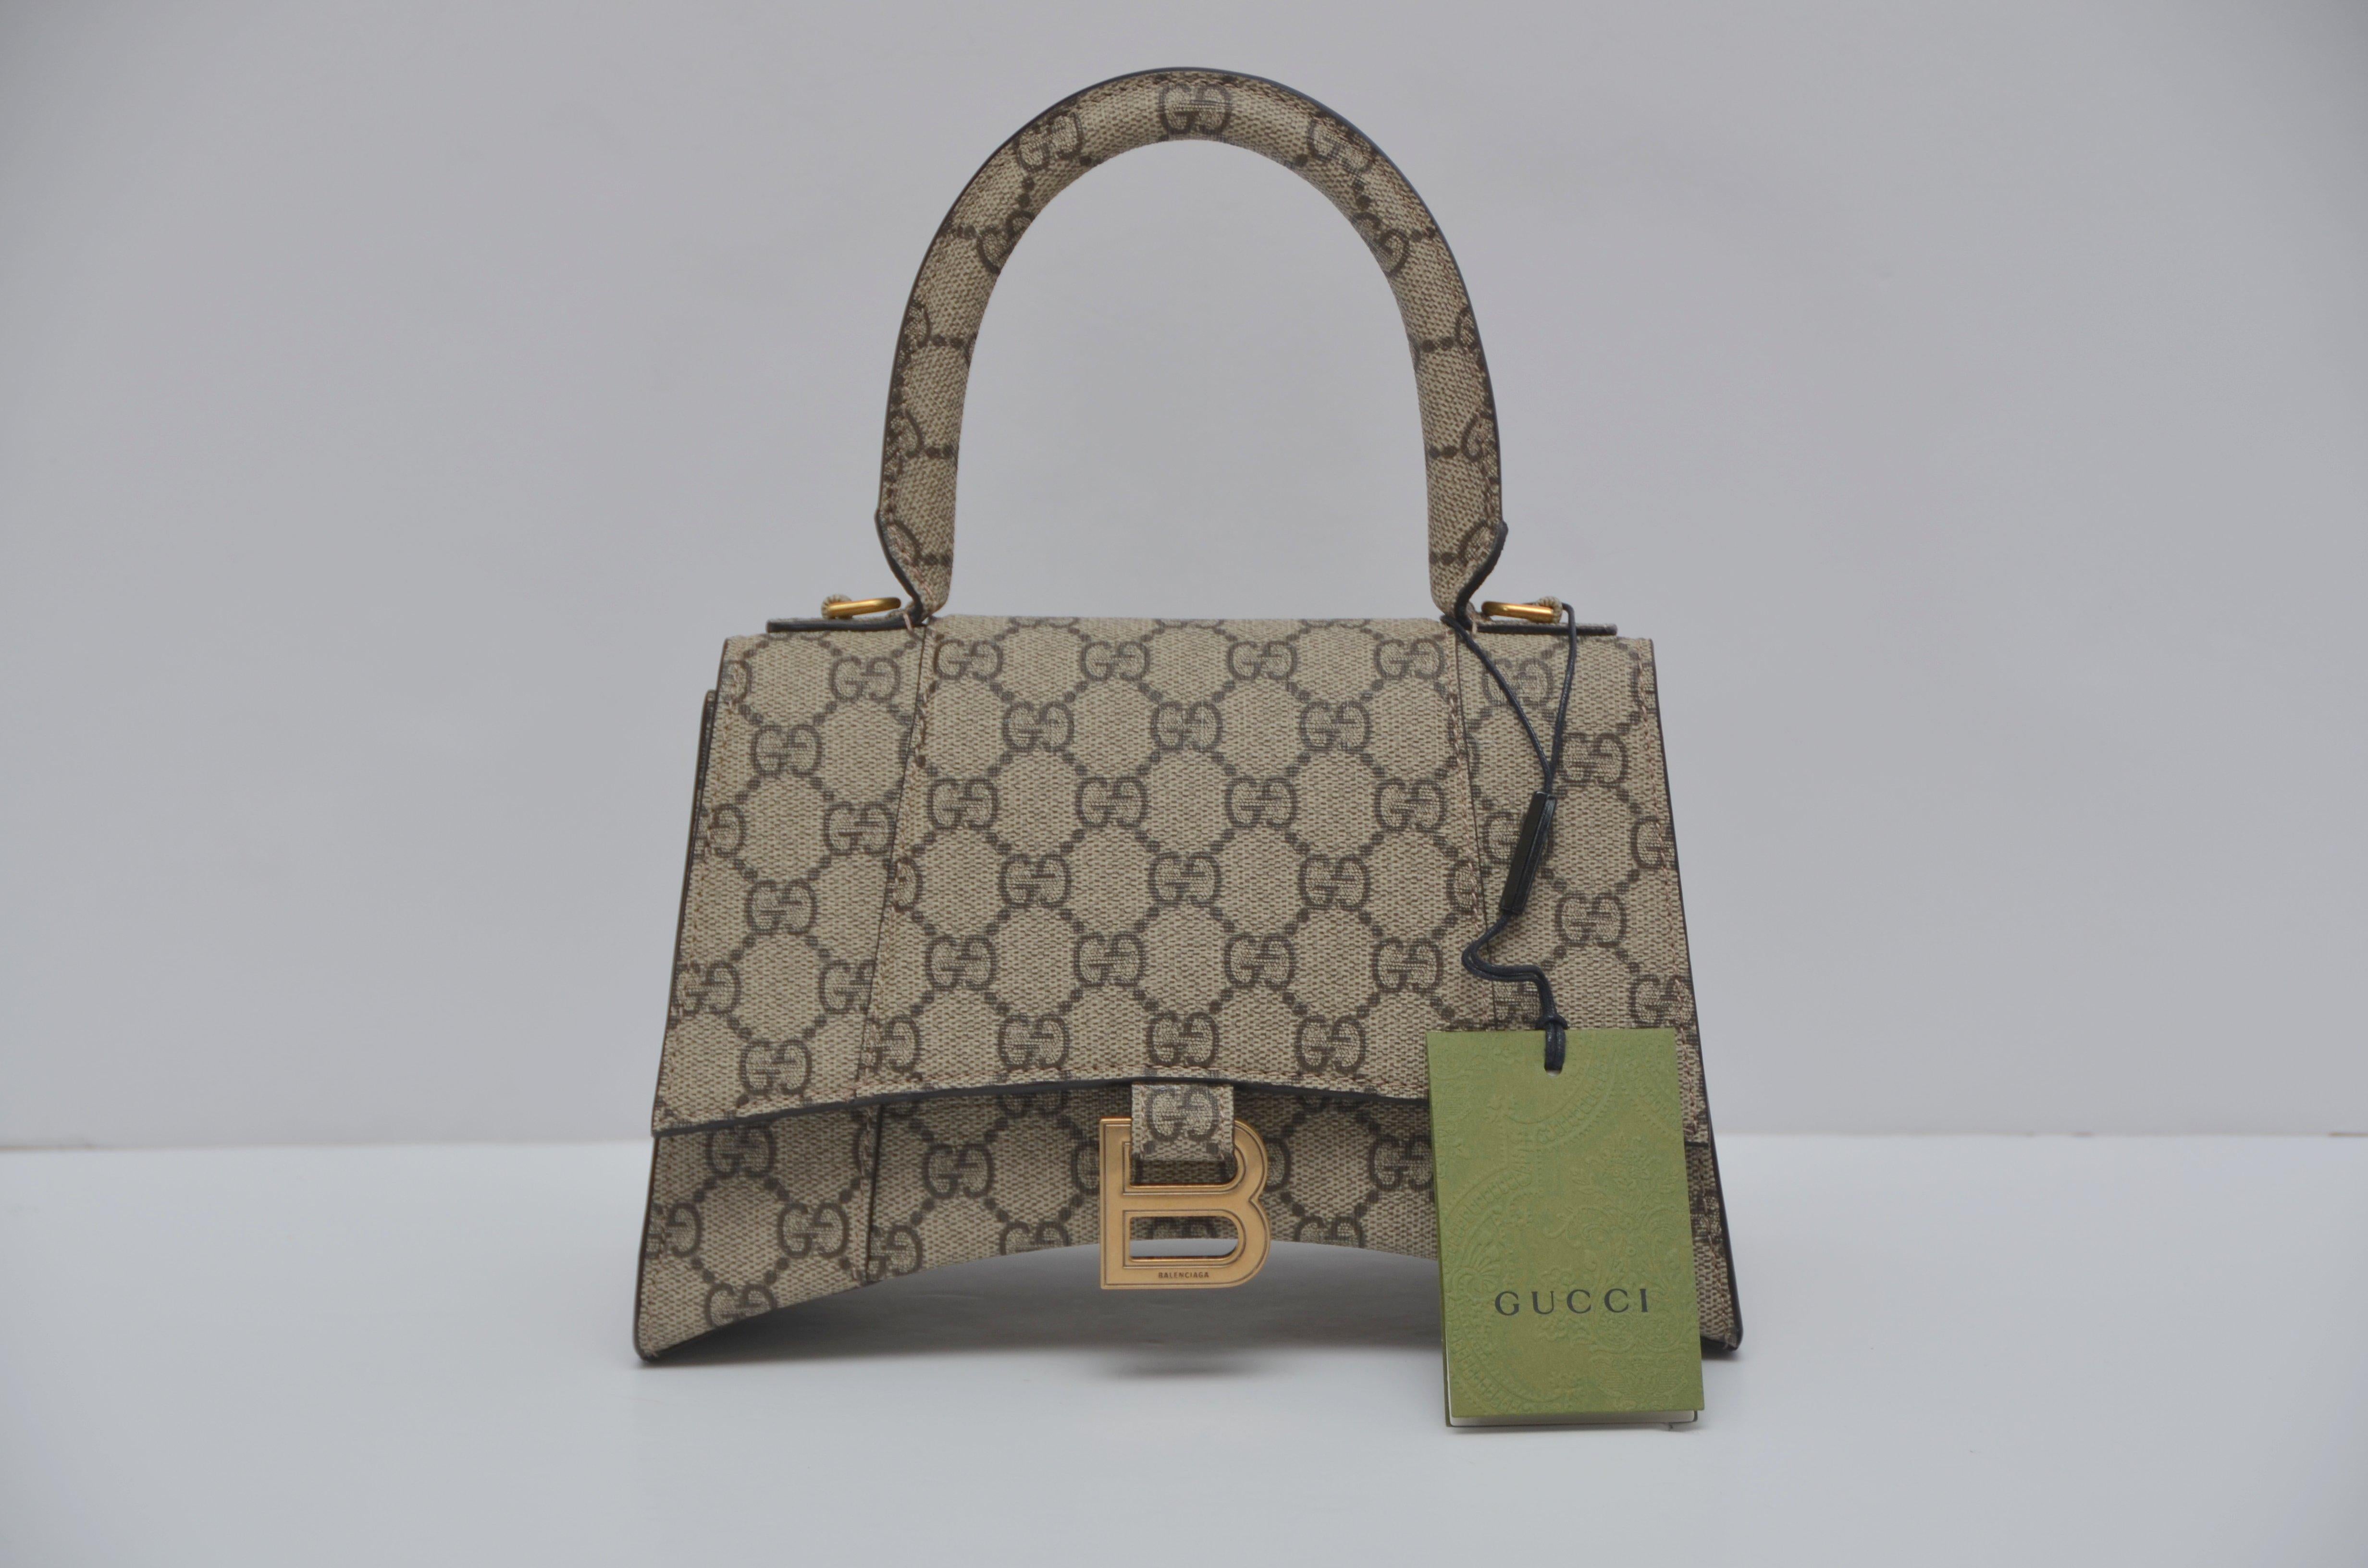 NEW! Gucci Beauty Magnetic Closure Green Floral STYLE PATTERN Bag/POUCH + GIFT!